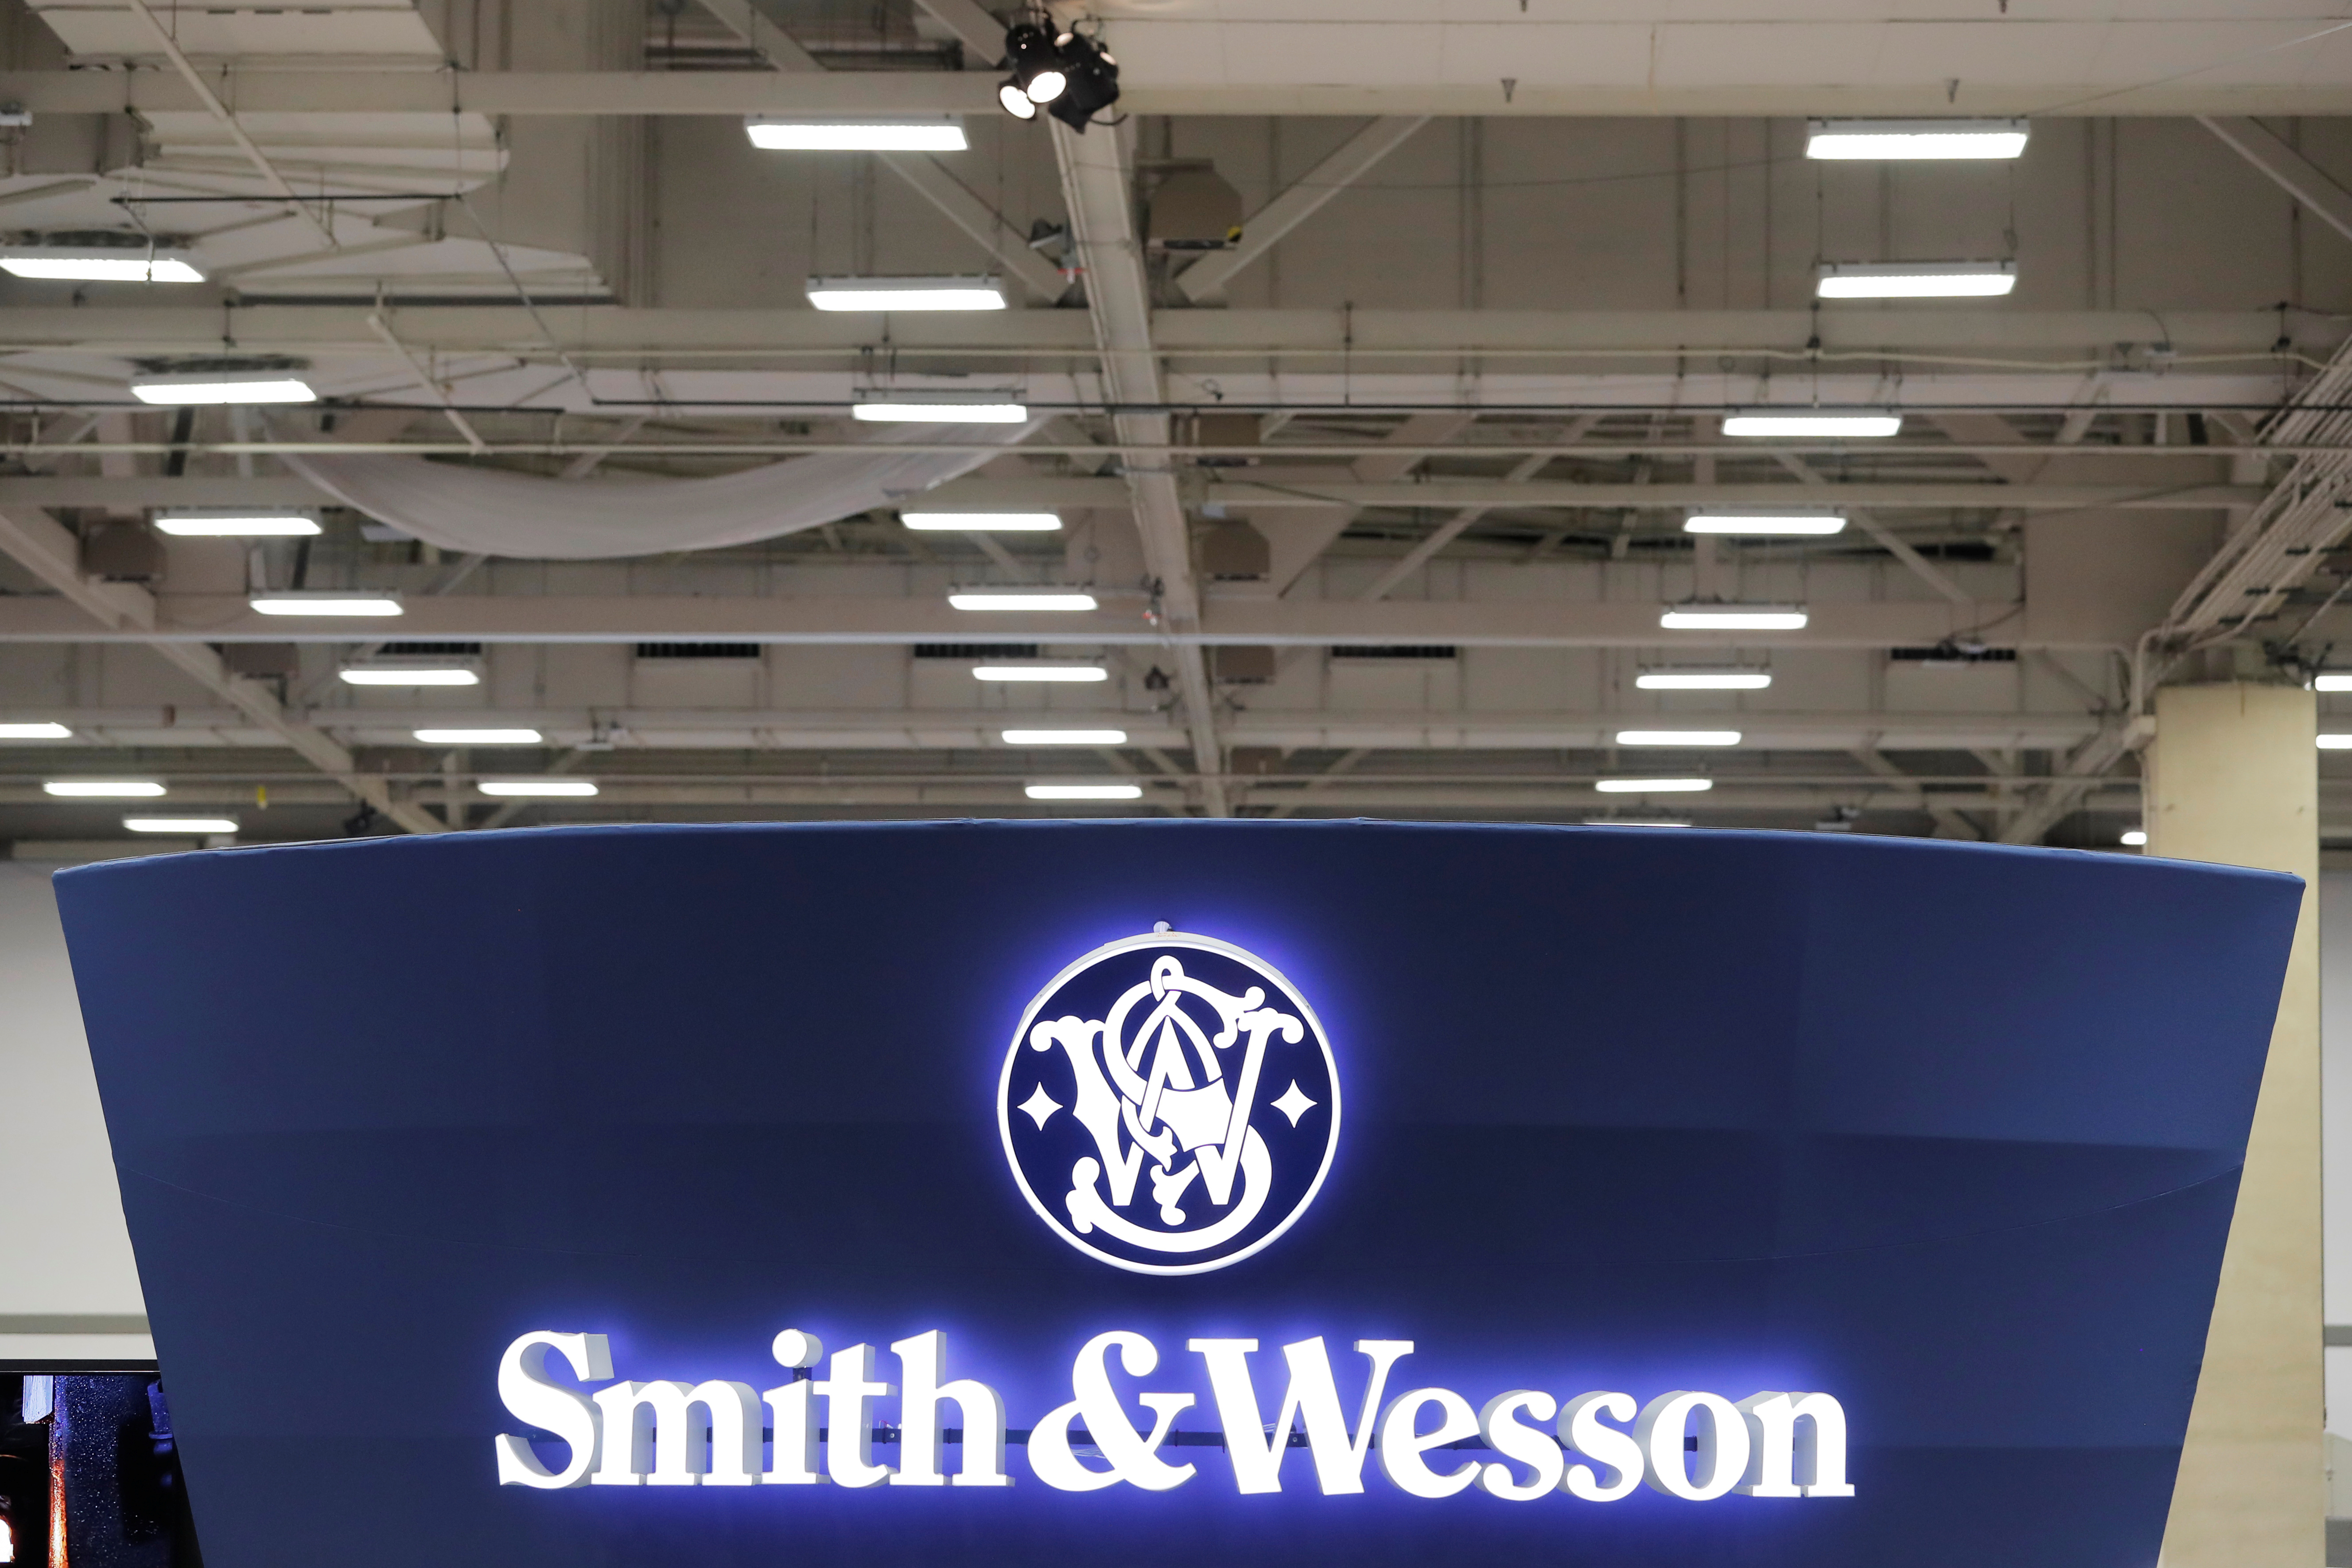 A Smith & Wesson logo is displayed during the annual National Rifle Association (NRA) convention in Dallas, Texas